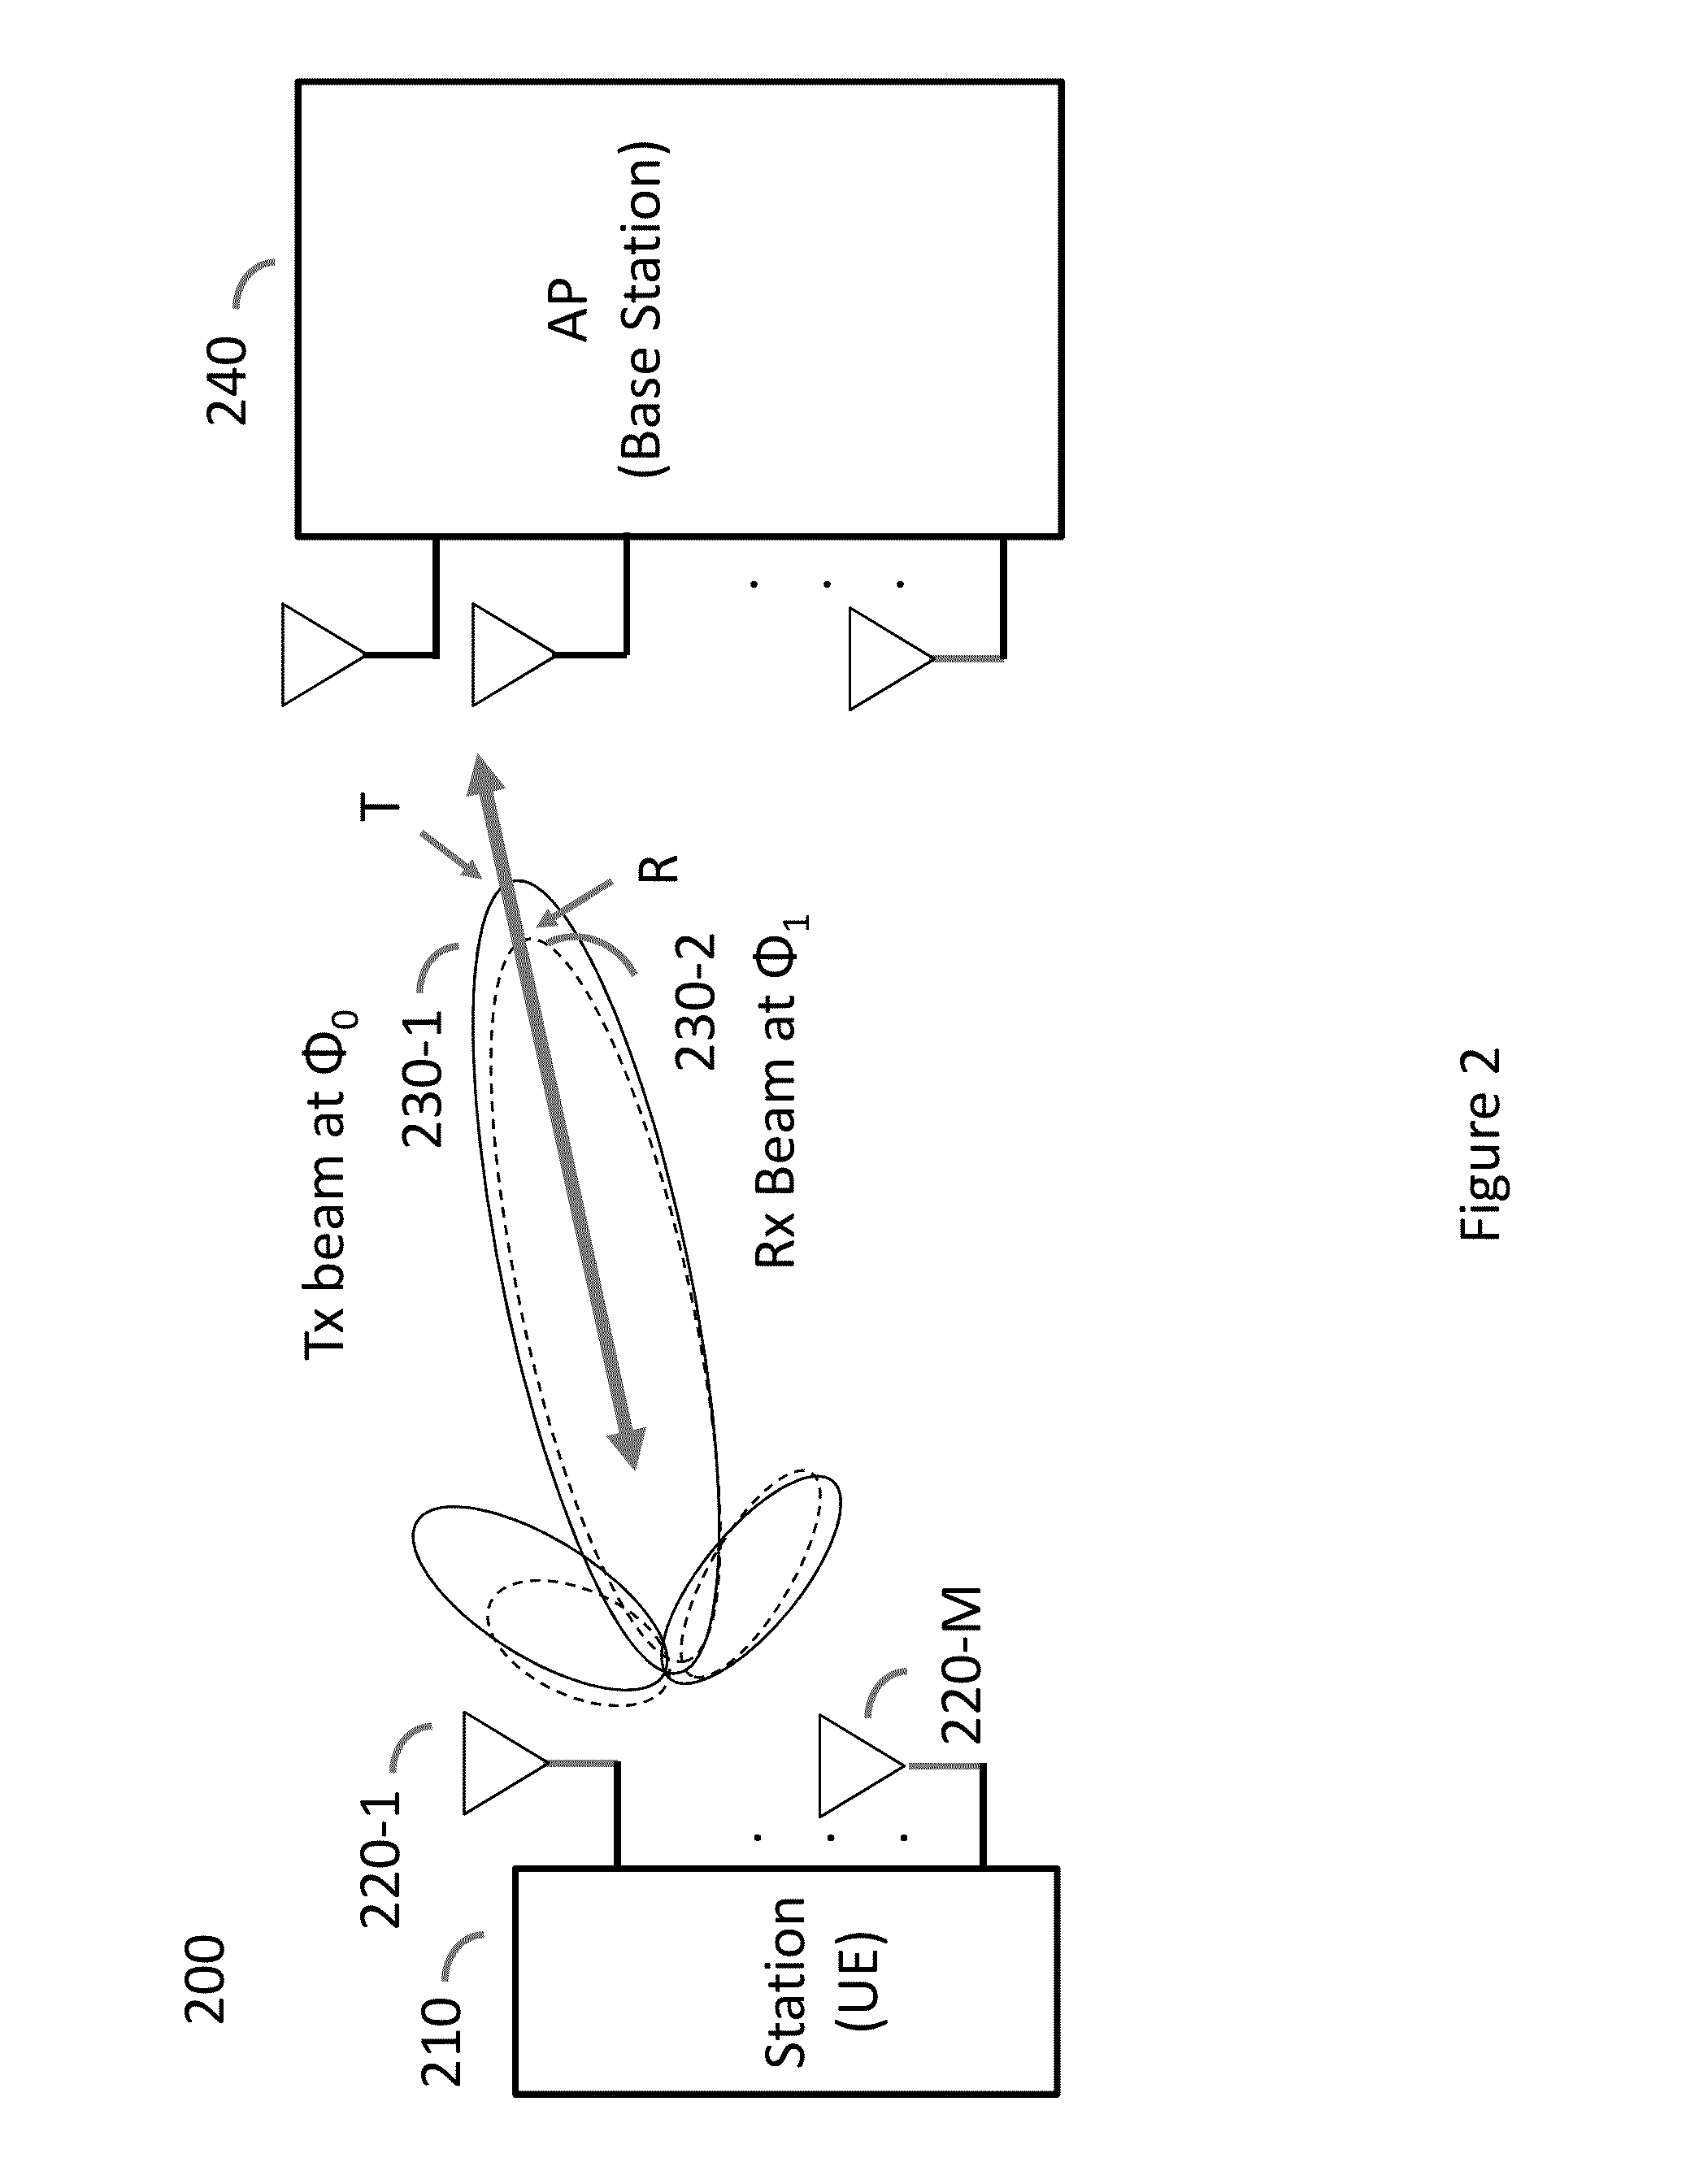 System and method for transmit and receive antenna patterns calibration for time division duplex (TDD) systems